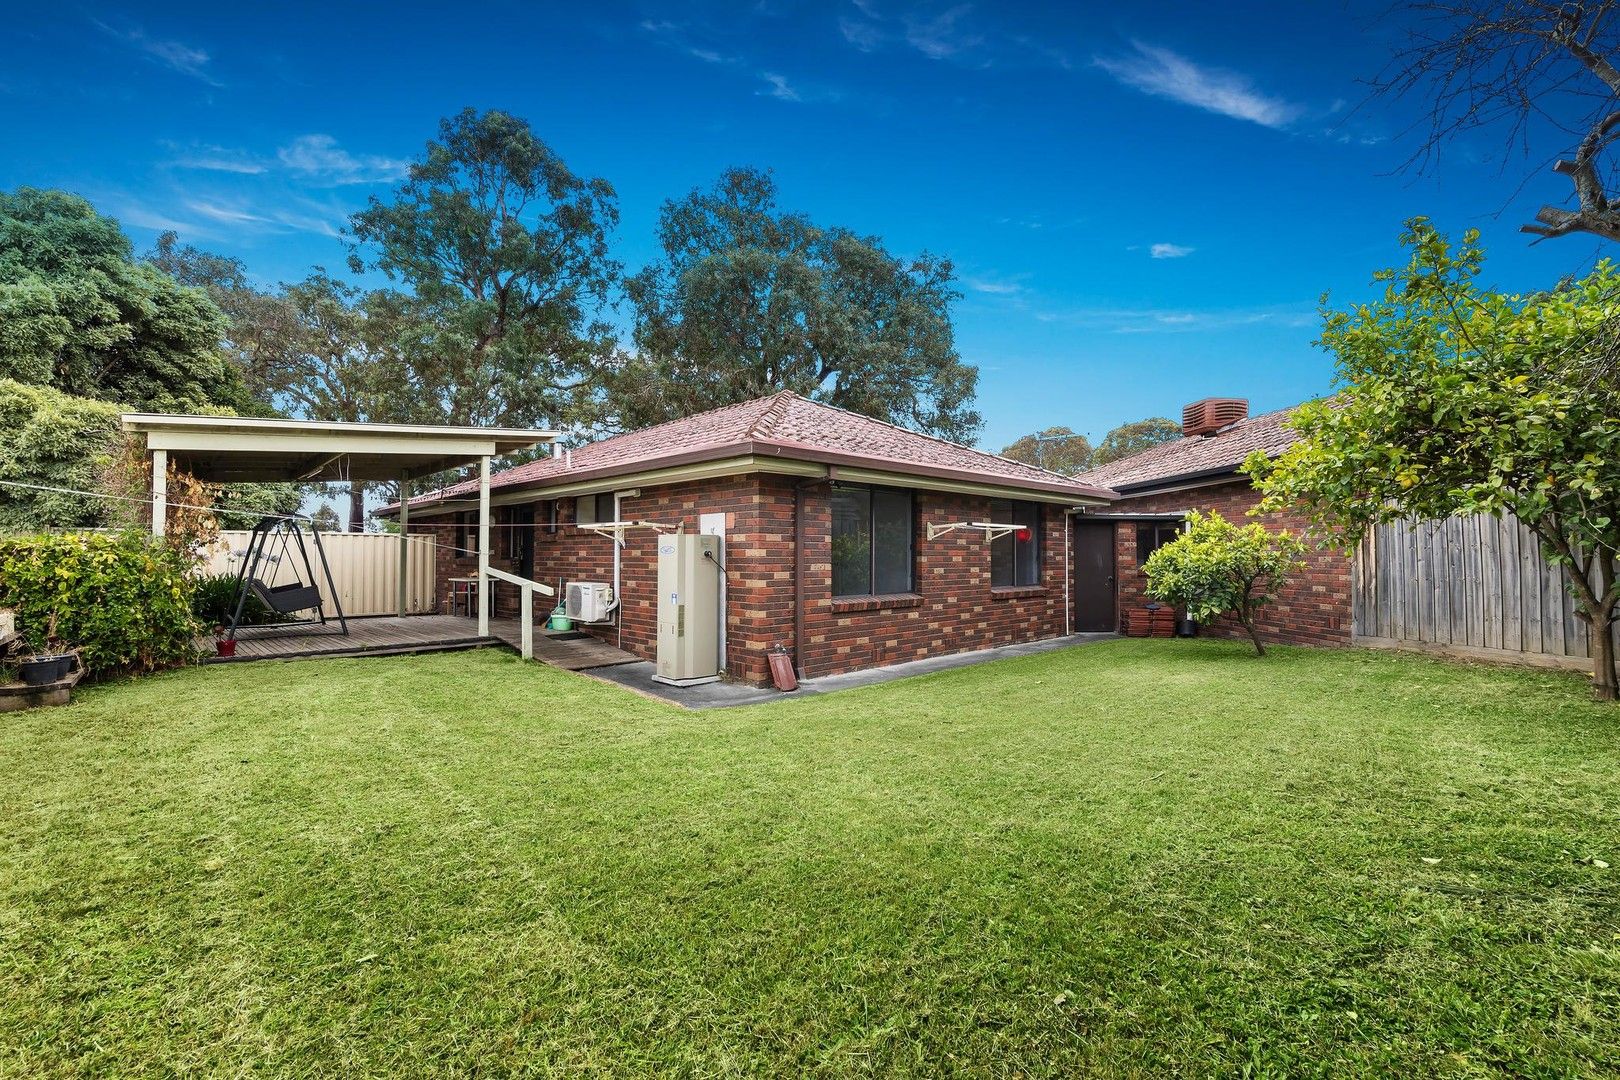 3 bedrooms Apartment / Unit / Flat in 89 Dobson Street FERNTREE GULLY VIC, 3156